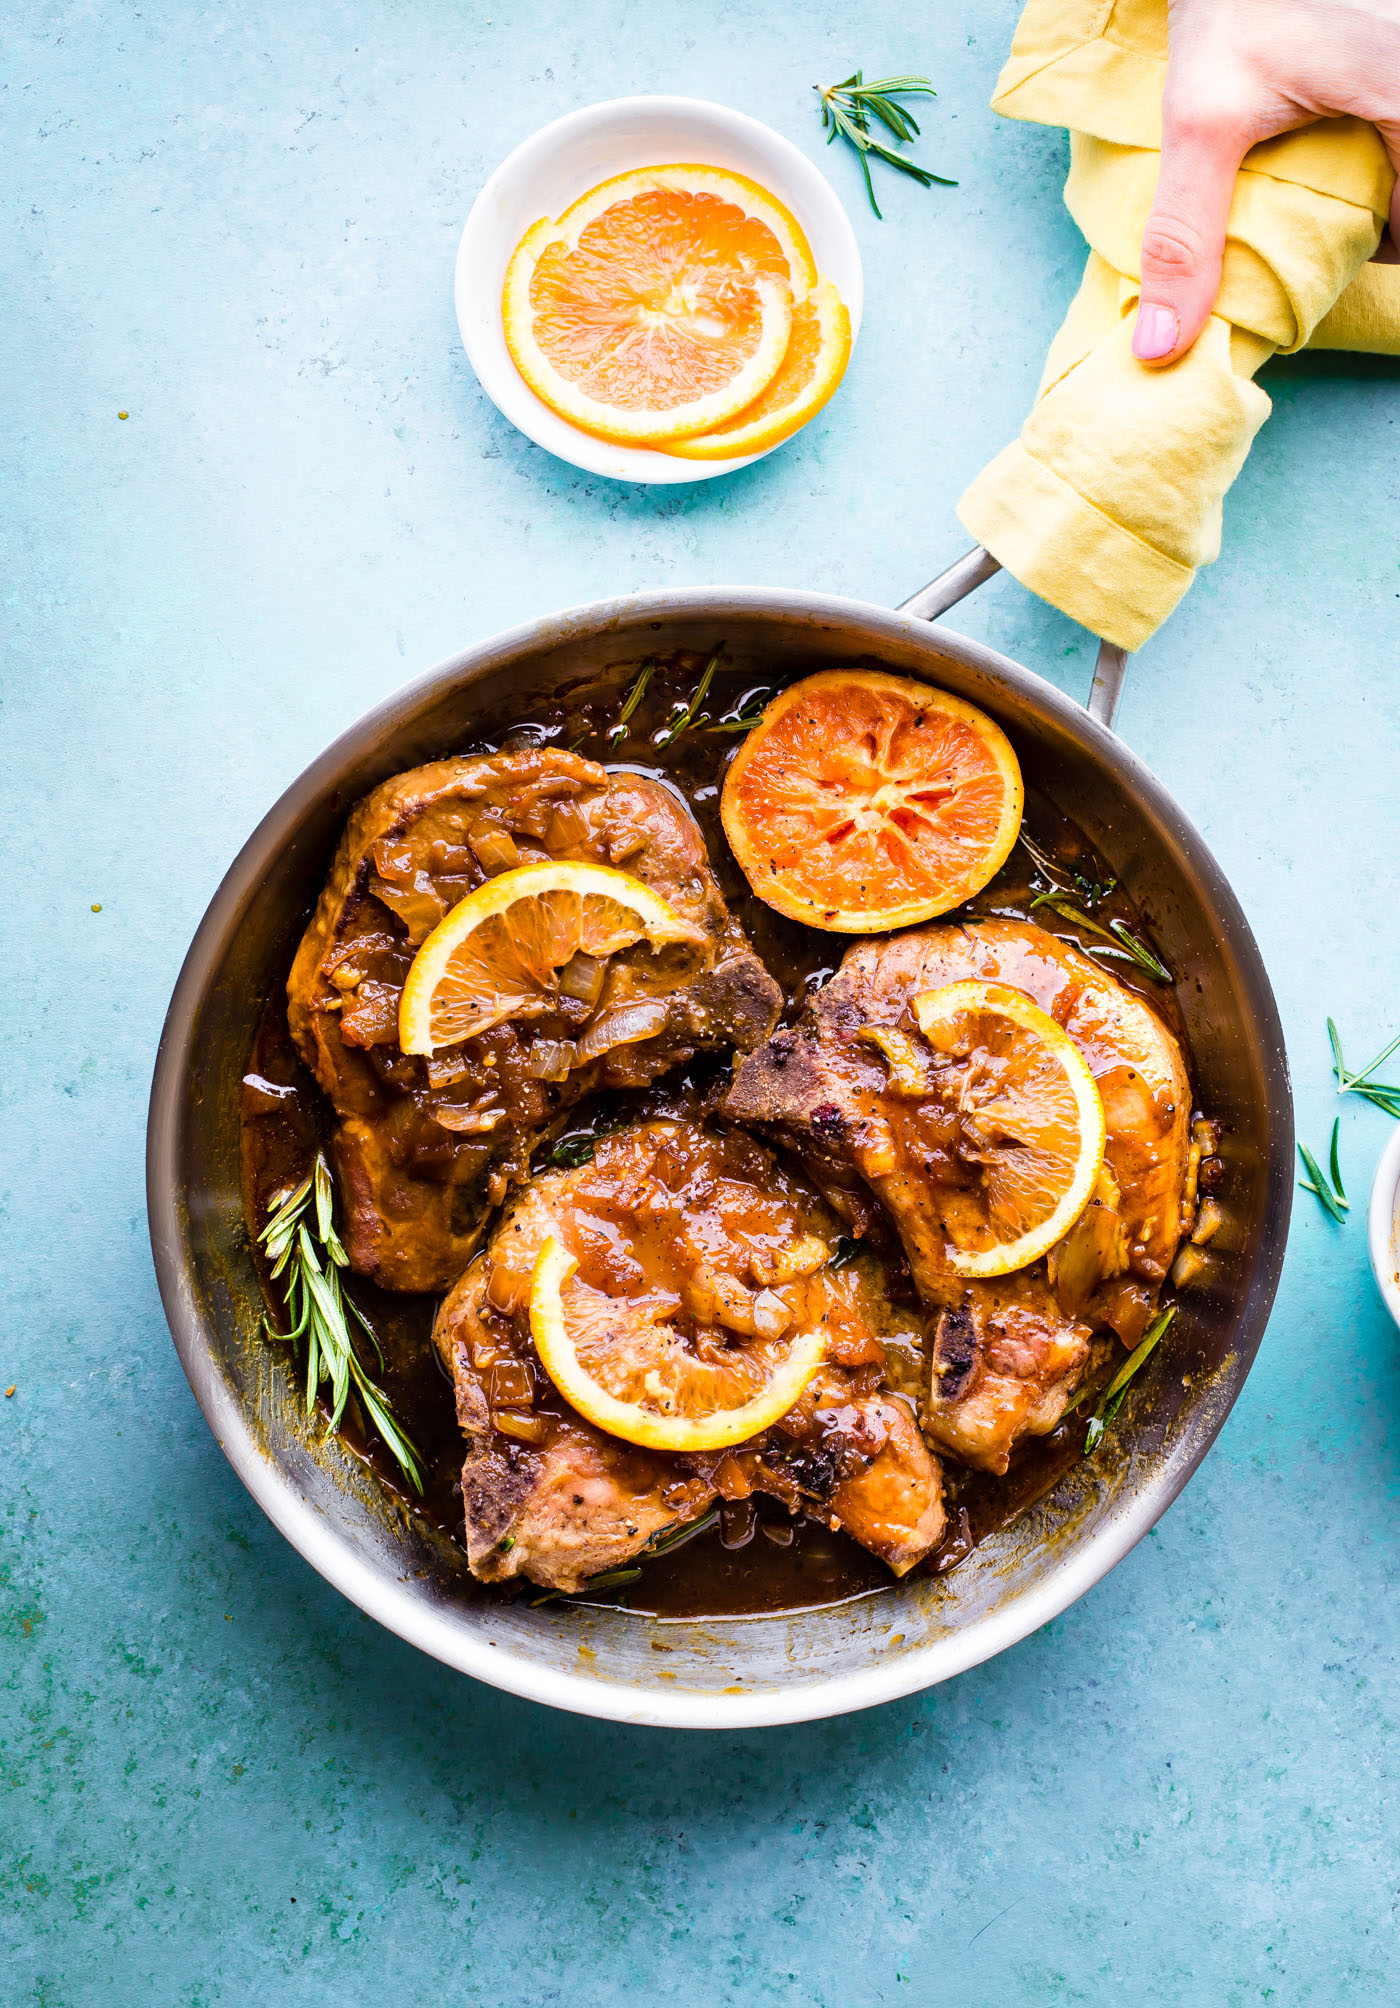 A Sticky Skillet Marmalade Marinated Pork Chops recipe that's quick to make with just a few simple ingredients! A Healthy one pan meal made with fresh orange, molasses, onion, marmalade, and seasoning. Just mix and marinate the pork chops for a sweet and tangy flavor. Naturally gluten free, dairy free, and paleo friendly.